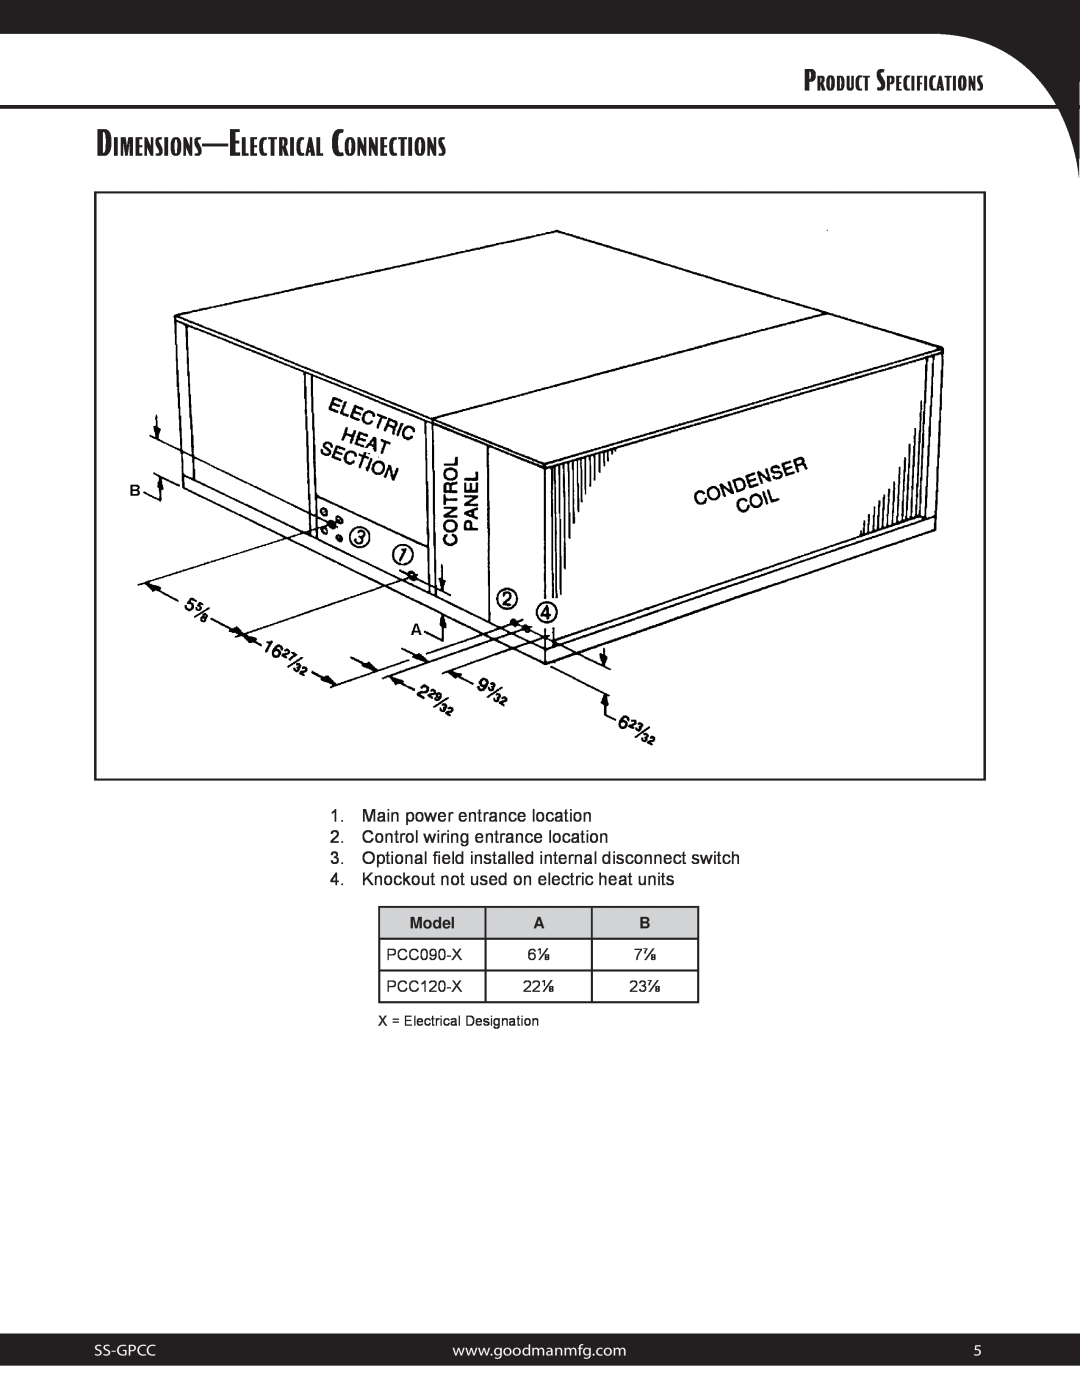 Goodman Mfg 10.3 EER Dimensions-Electrical Connections, Product Specifications, Main power entrance location, Ss-Gpcc 